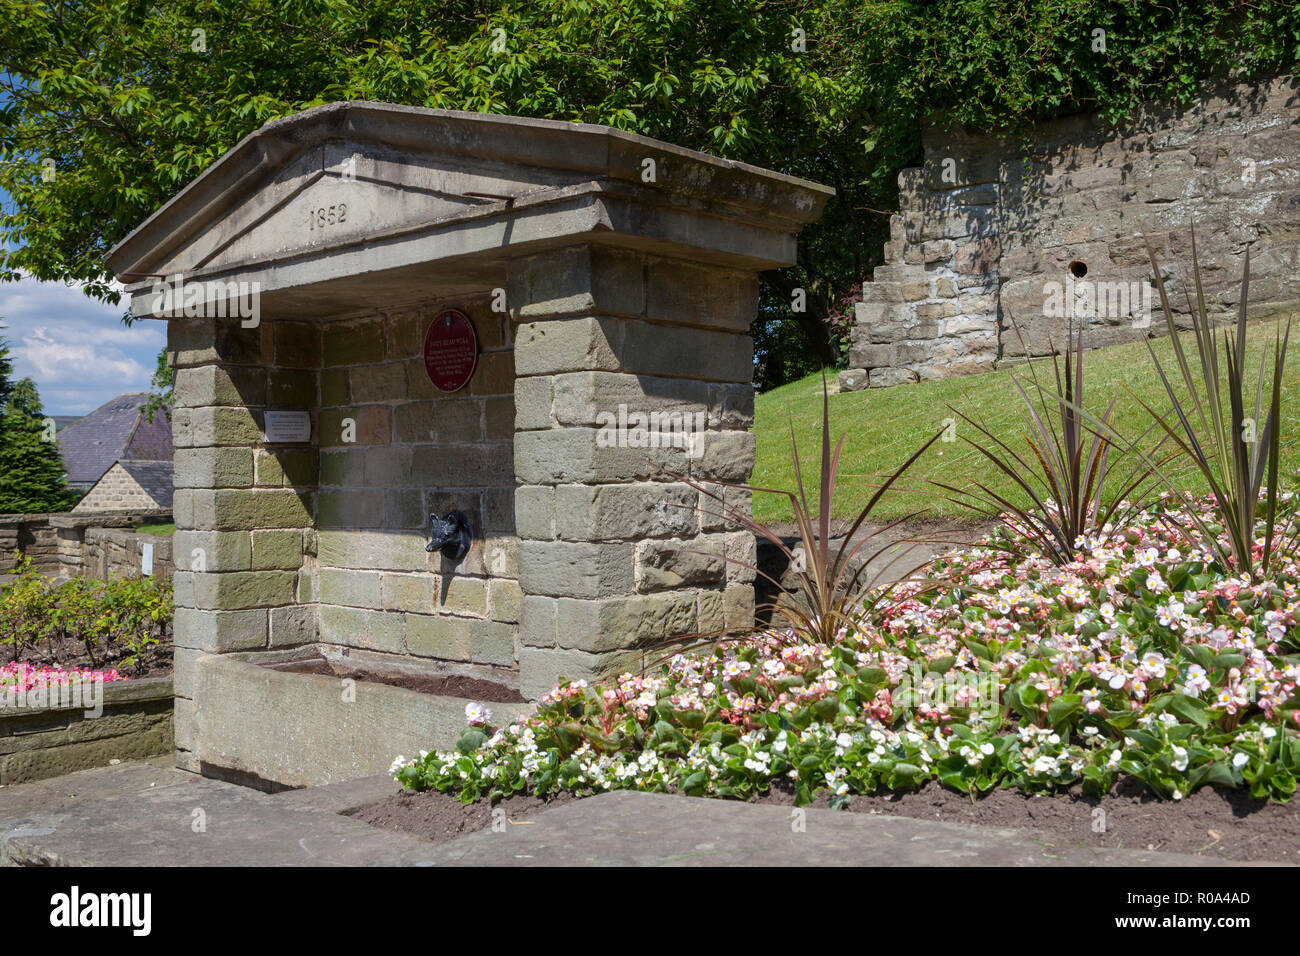 Fox's head well in Pateley Bridge, Nidderdale, Yorkshire Dales, surrounded by an attractive flower display Stock Photo